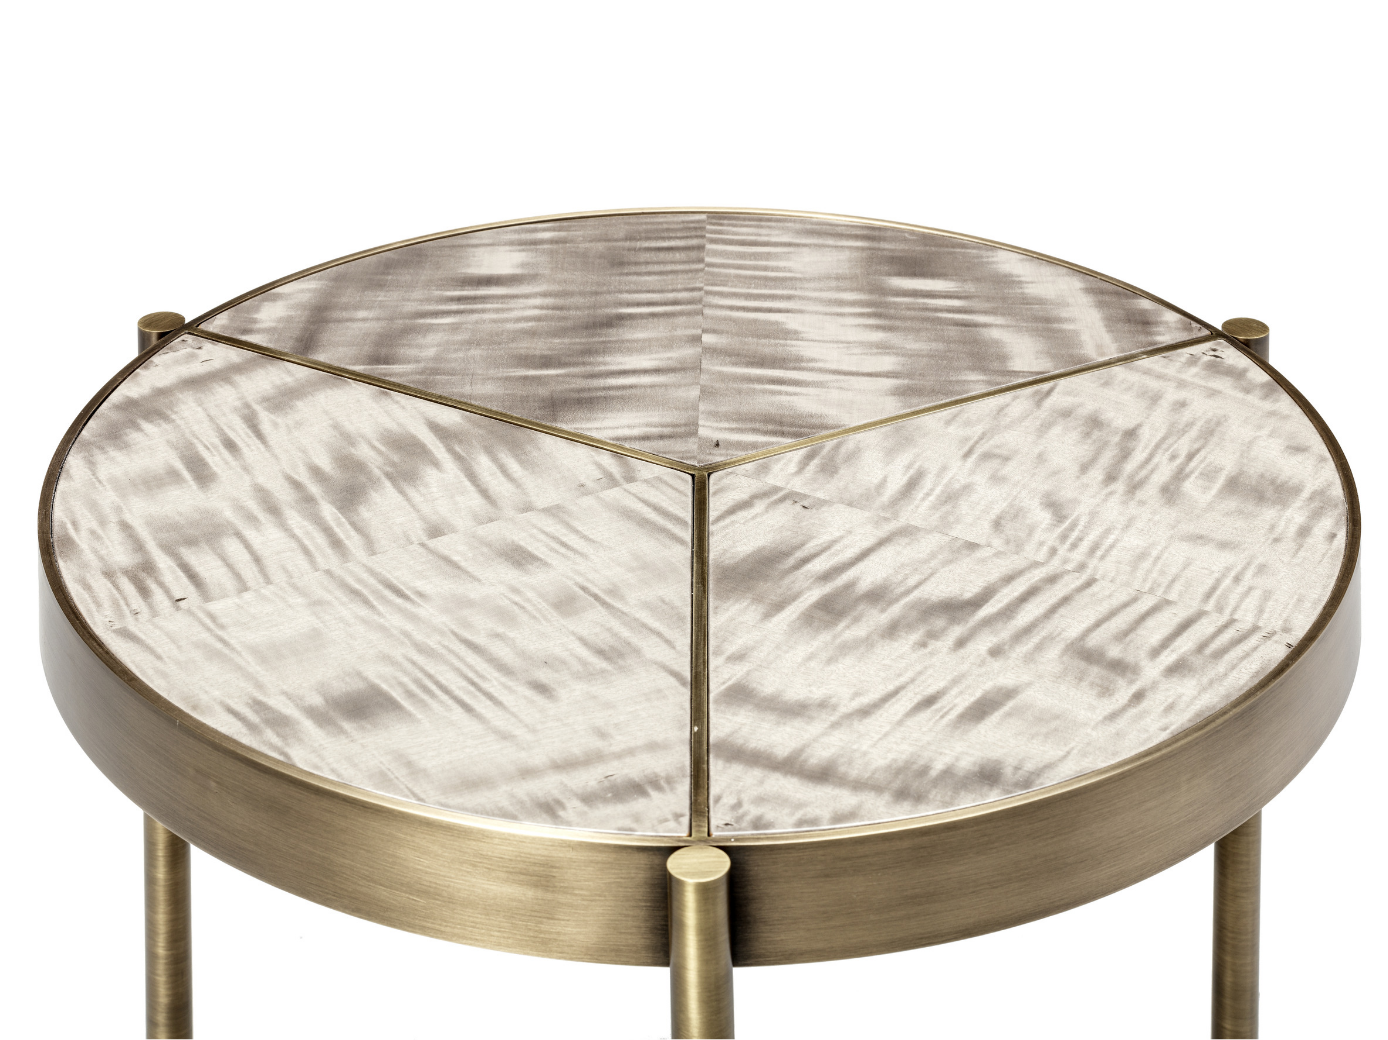 This table sober and truly elegant makes a great contrast in a room full of life. Mixing two distinct materials it shows the potencial in any room. This modern piece of (...)